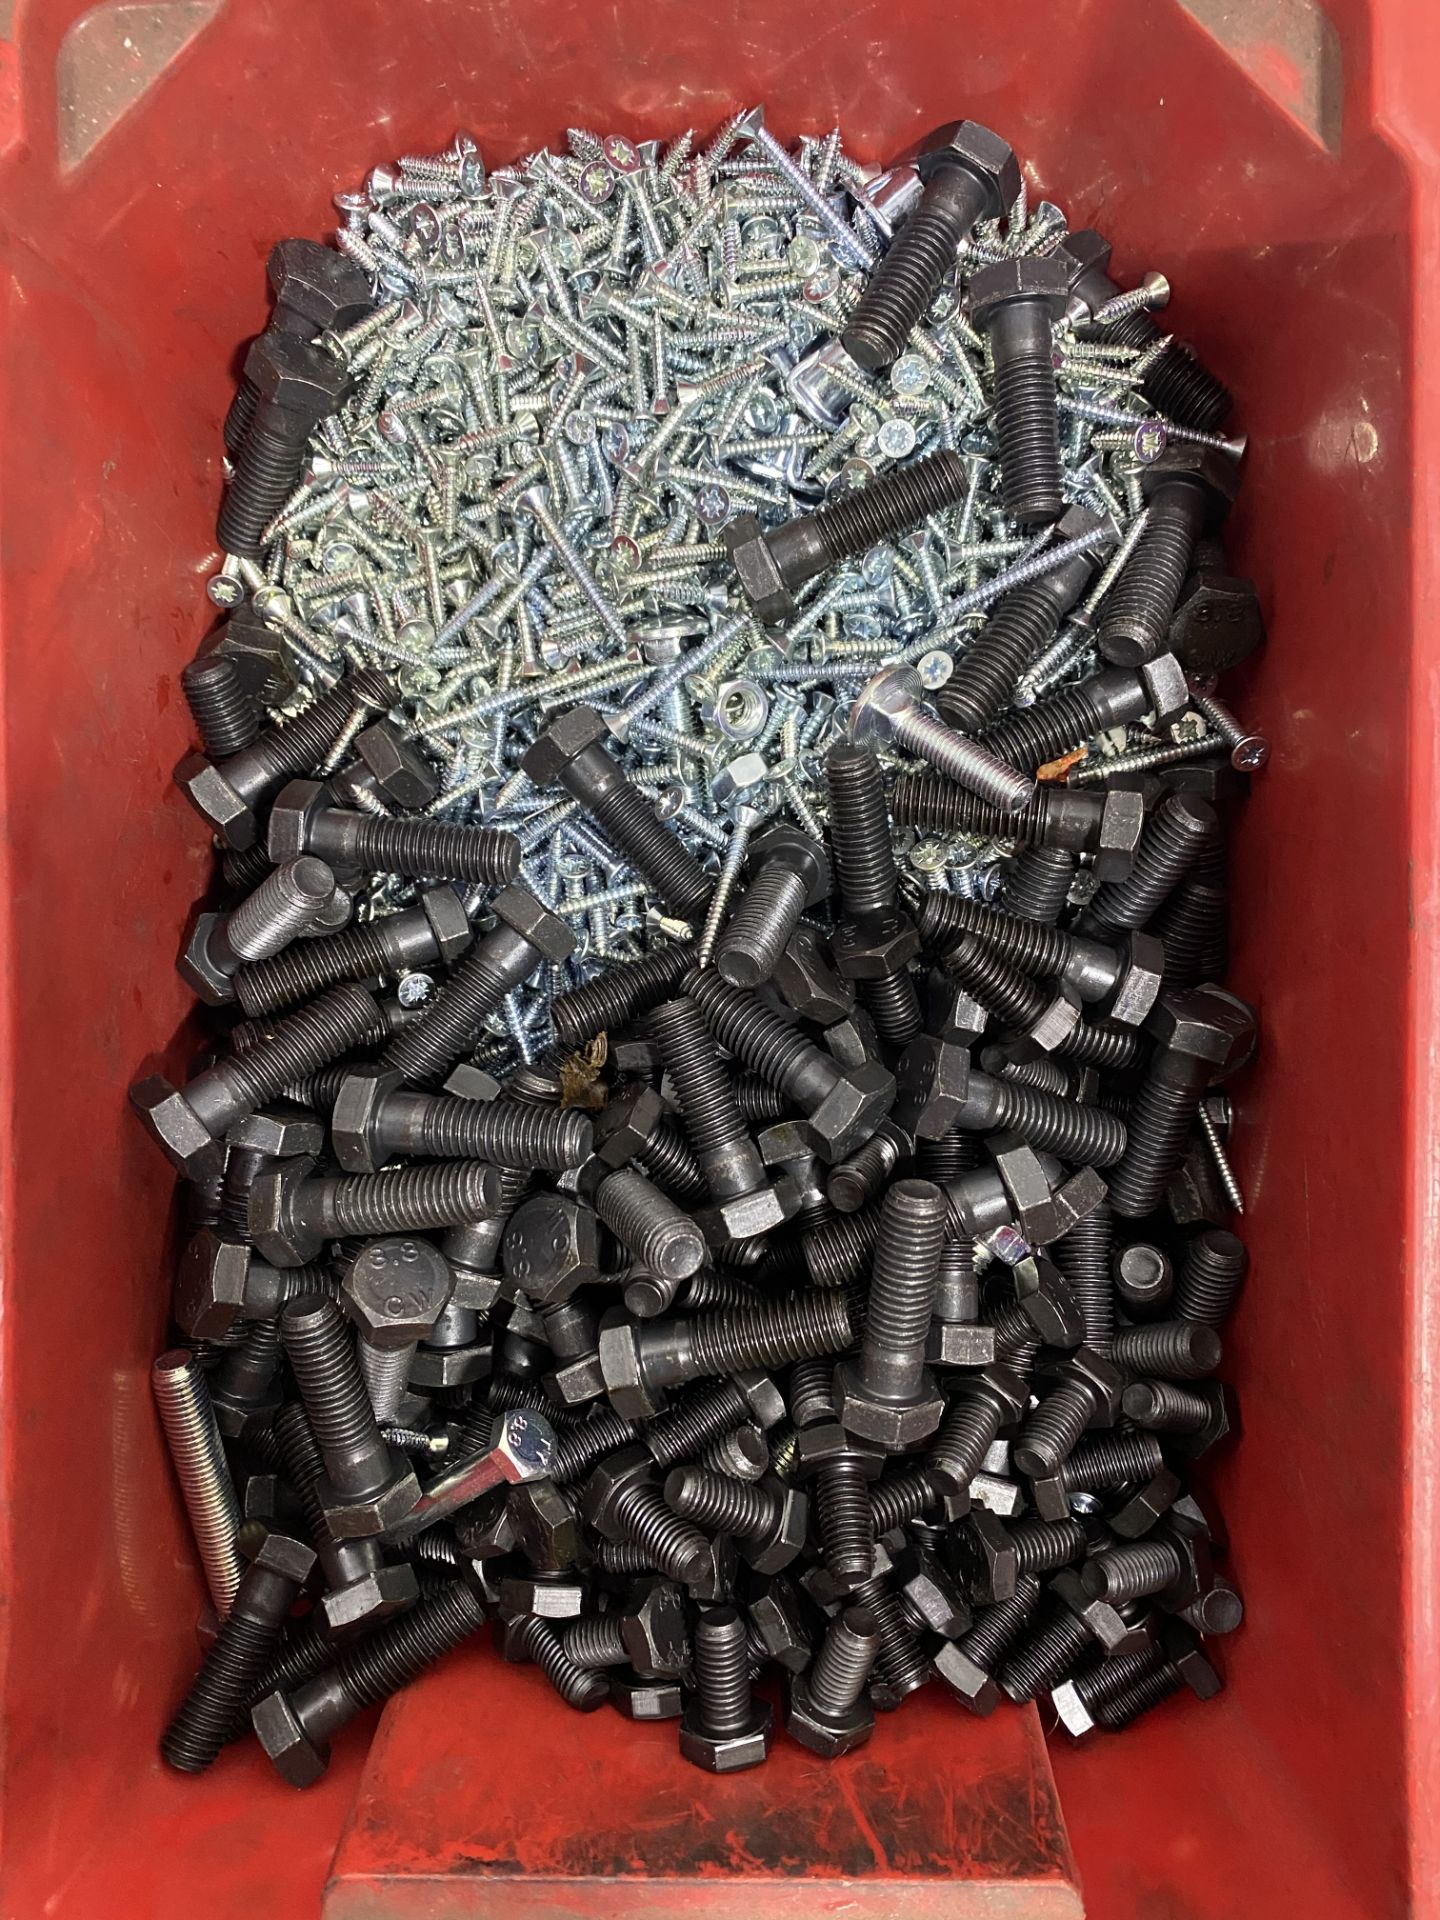 Large Quantity Of Screws,Nuts,Bolts,Fasteners And Various Other Equipment - Image 7 of 20